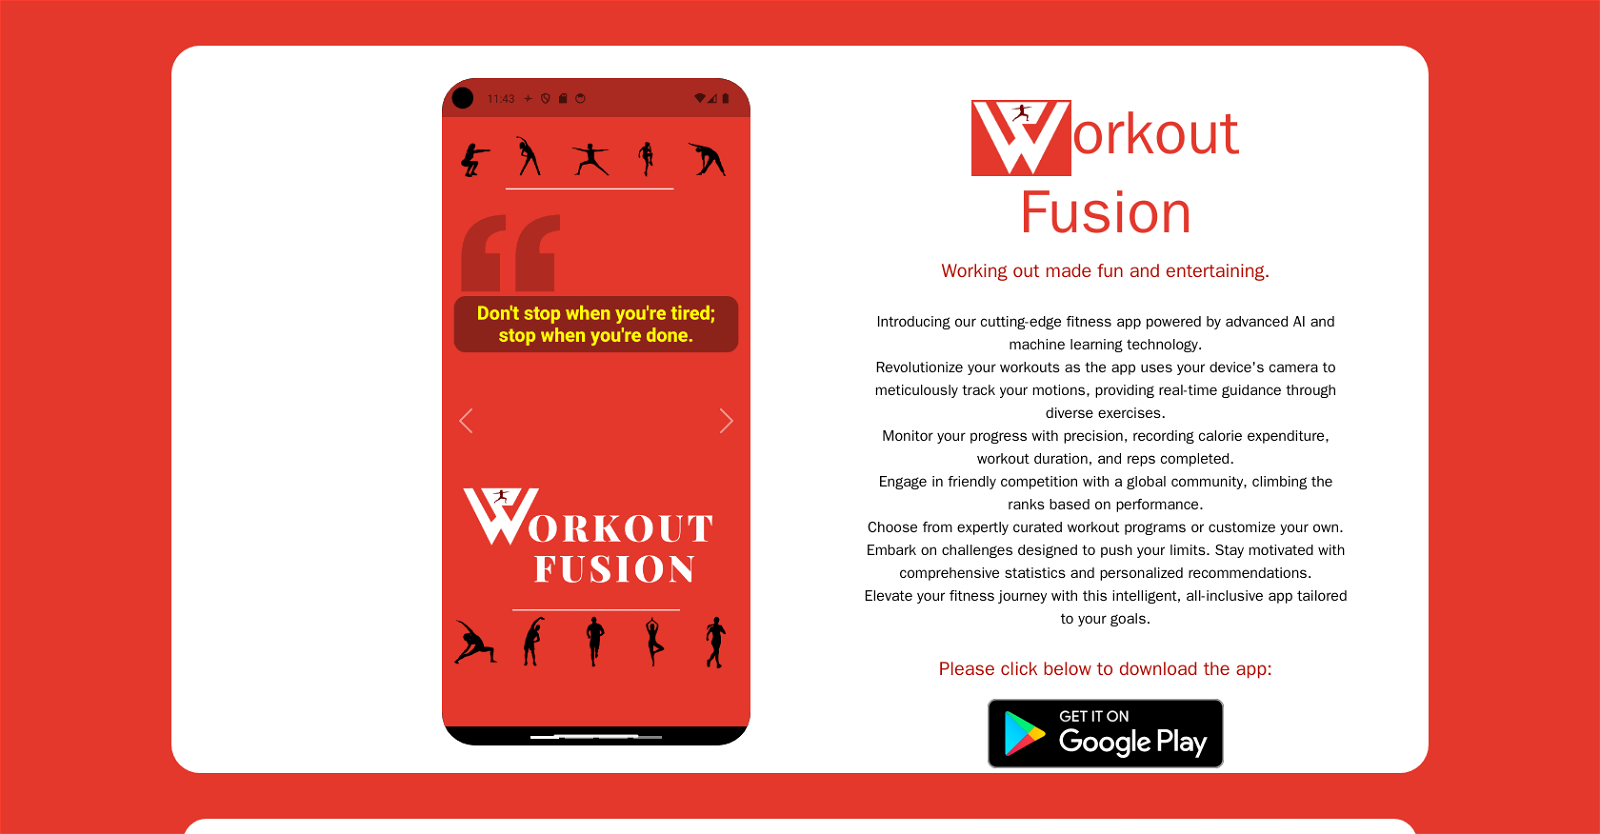 Workout Fusion website